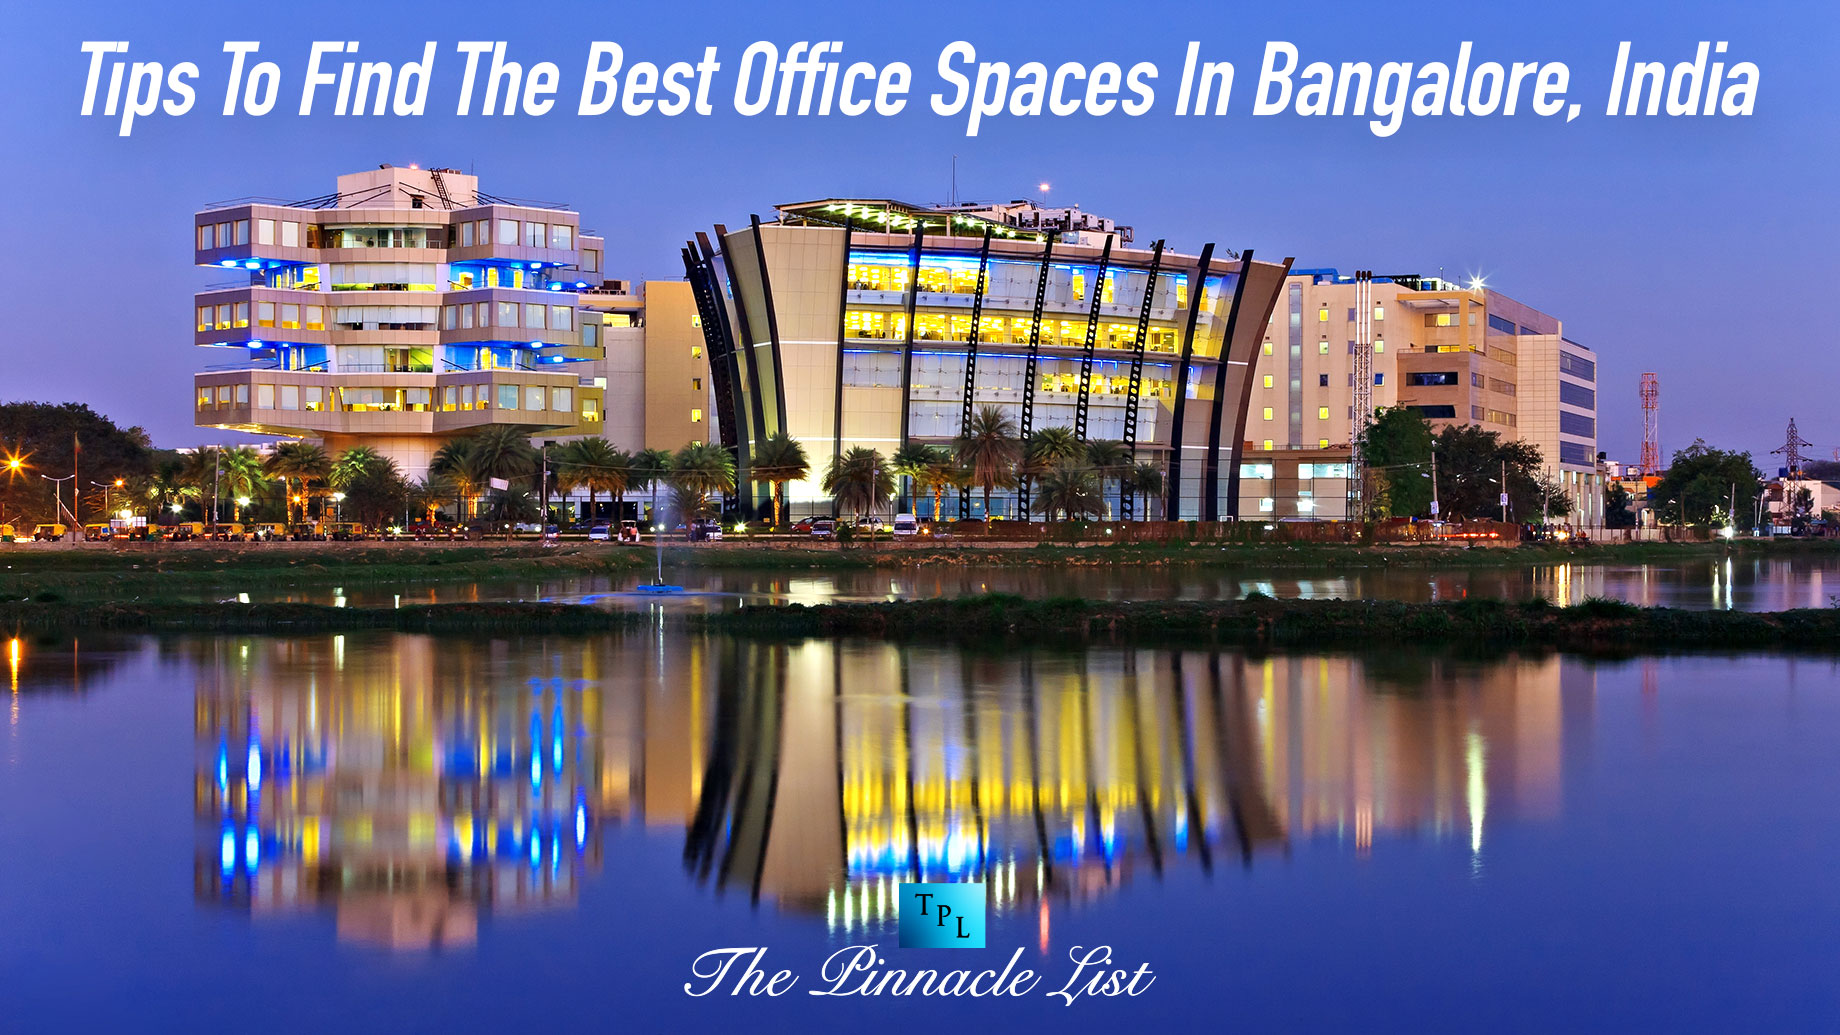 Tips To Find The Best Office Spaces In Bangalore, India